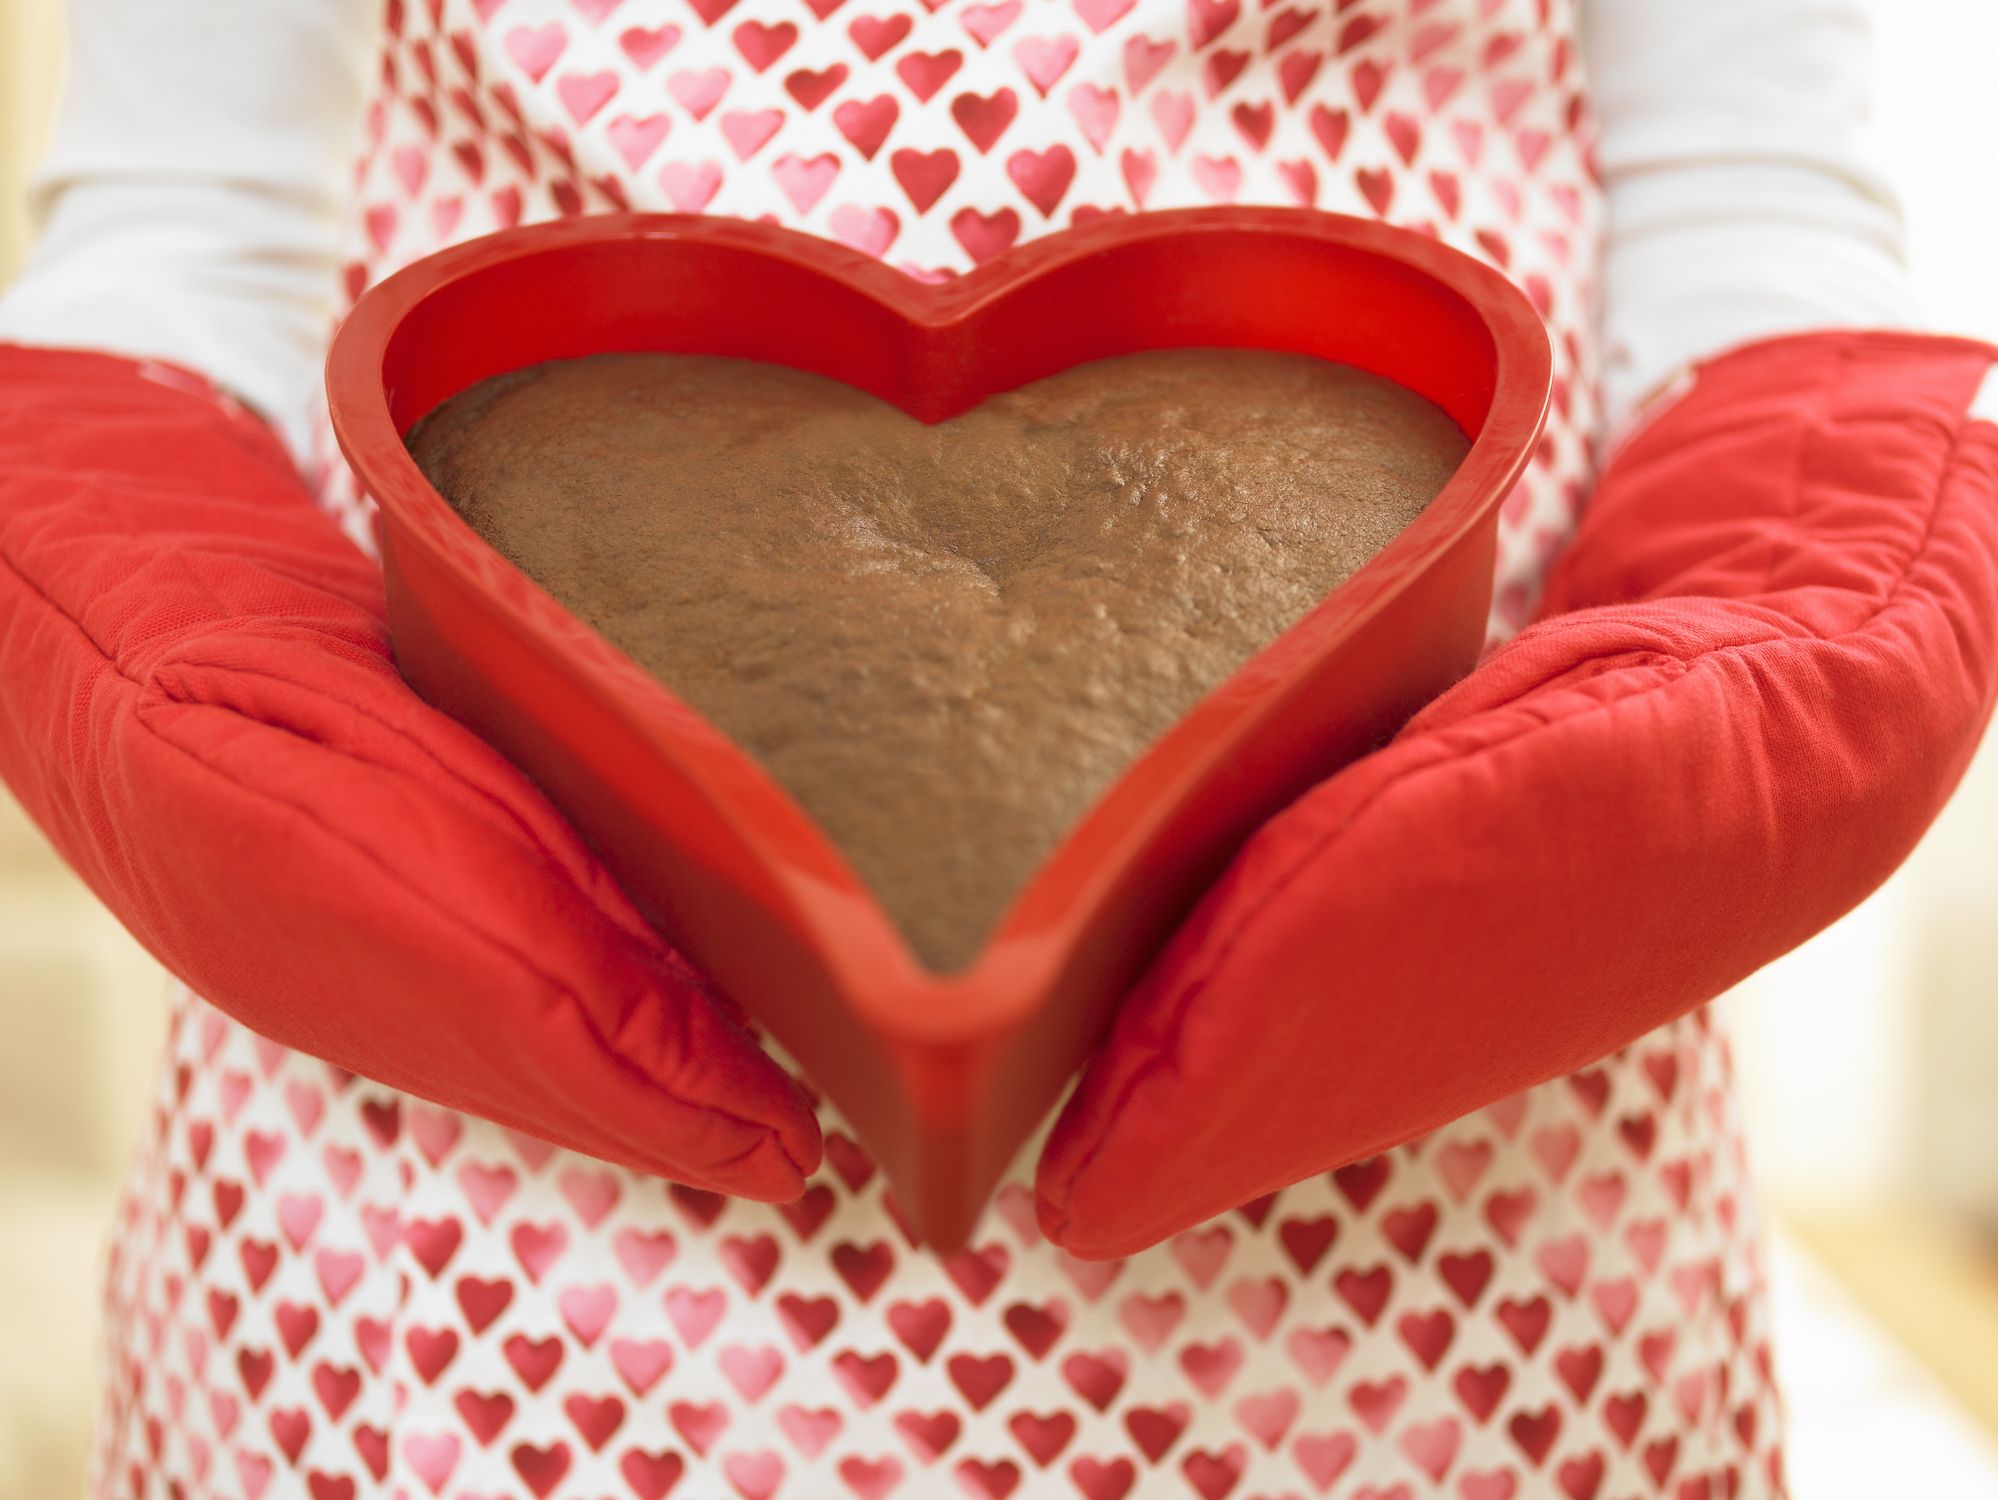 20 Great Things to Do If You're Single on Valentine's Day